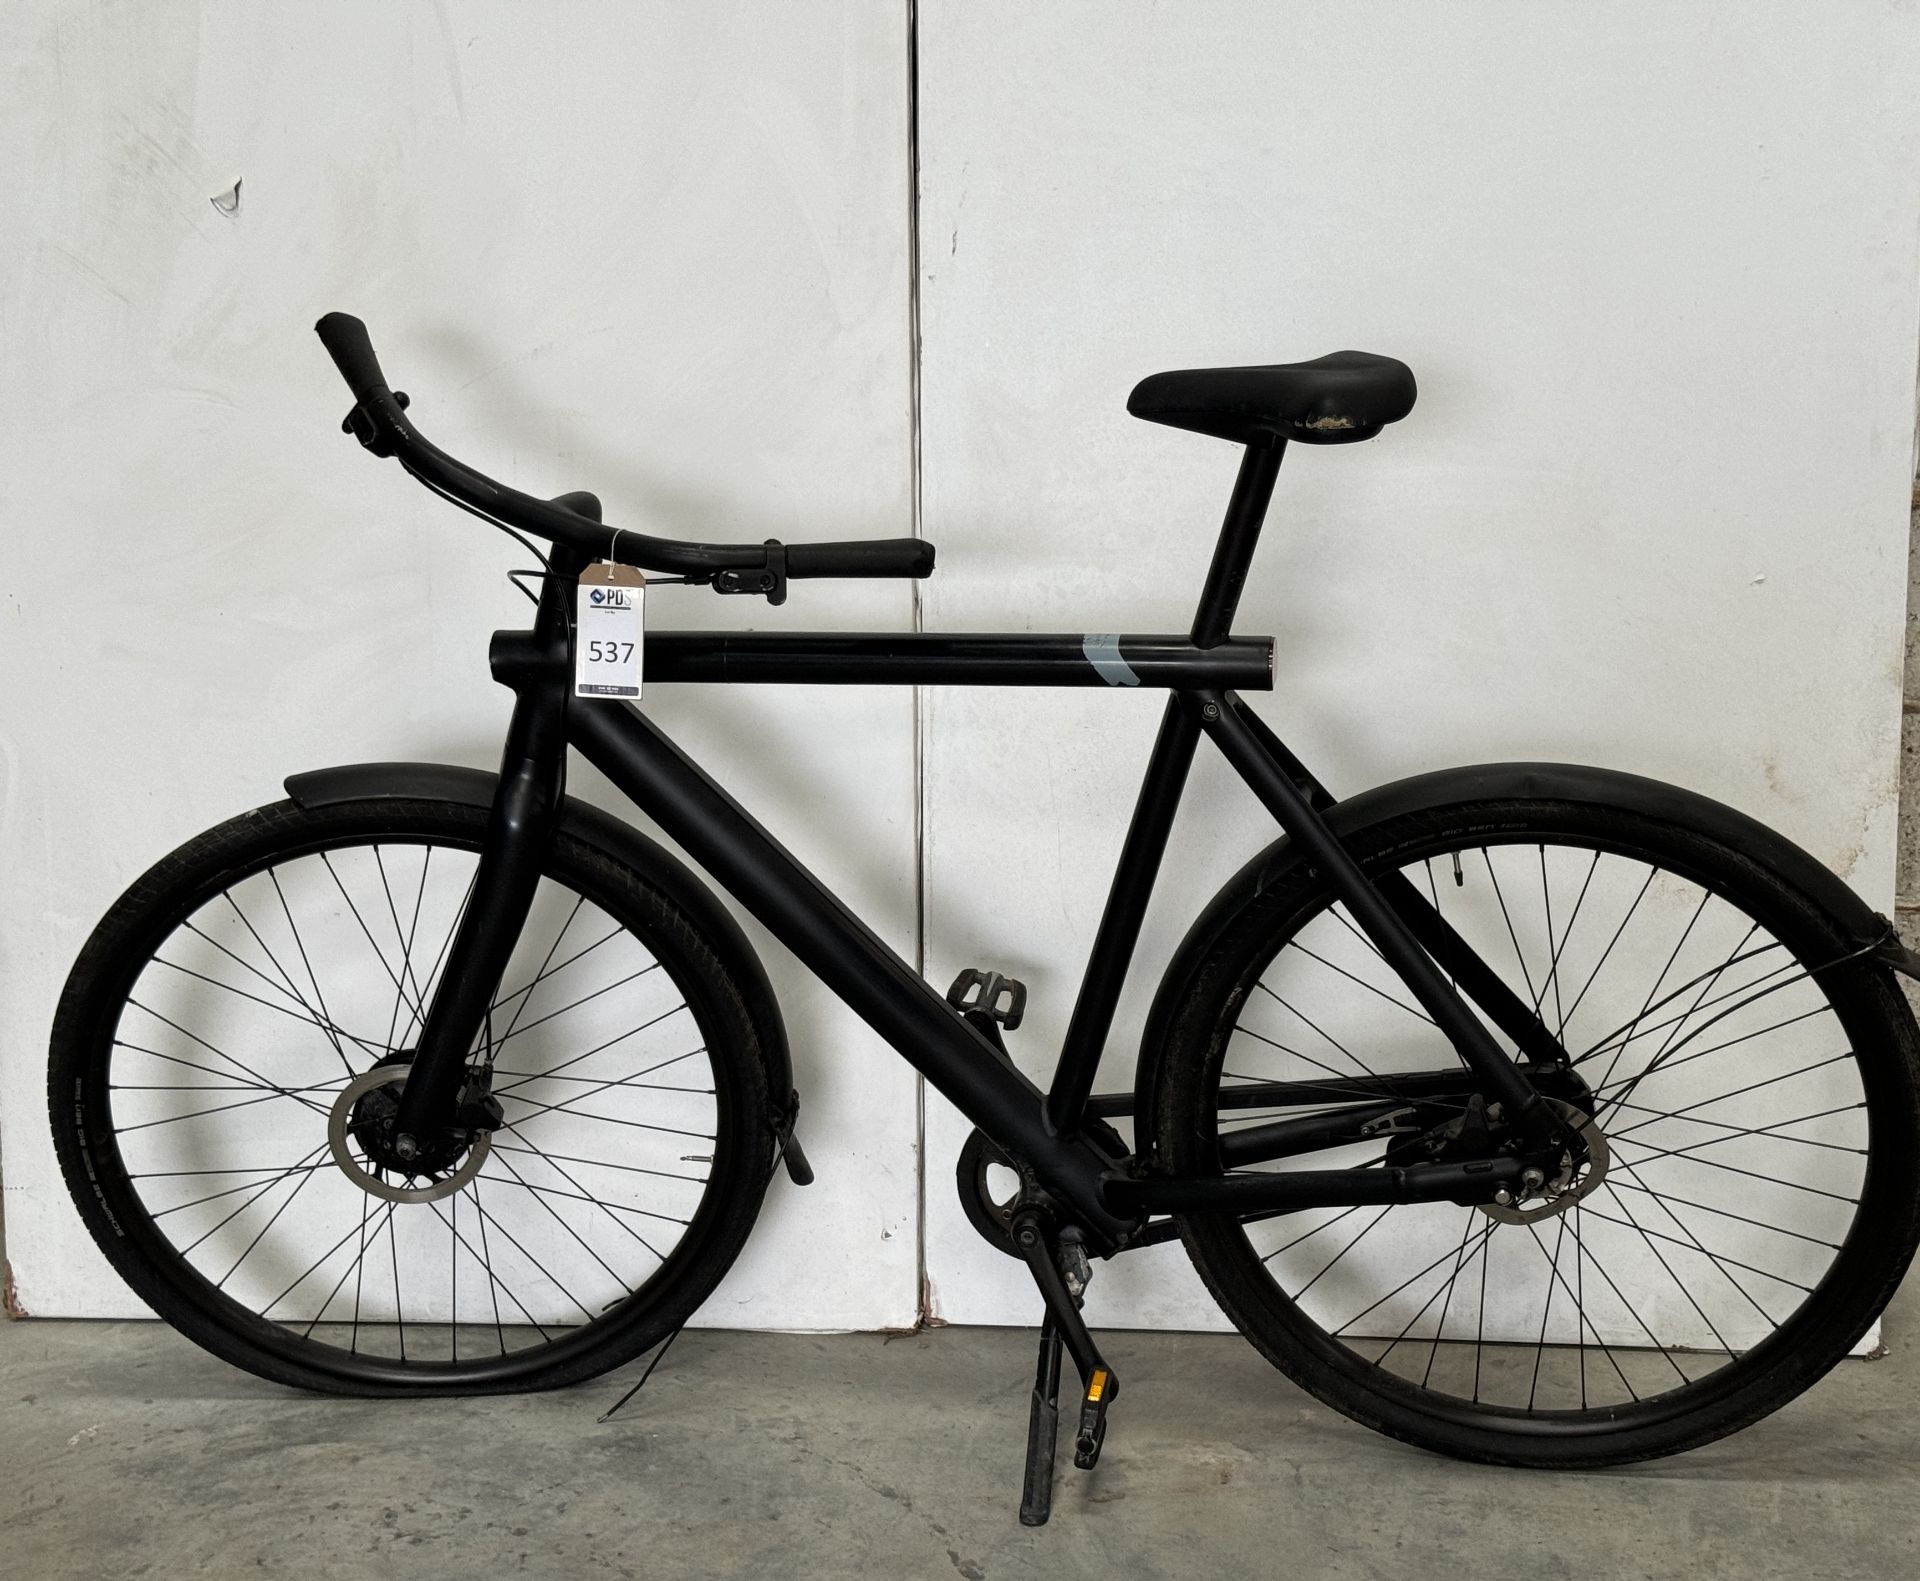 VanMoof S3 Electric Bike, Frame Number ASY3118479 (NOT ROADWORTHY - FOR SPARES ONLY) (No codes